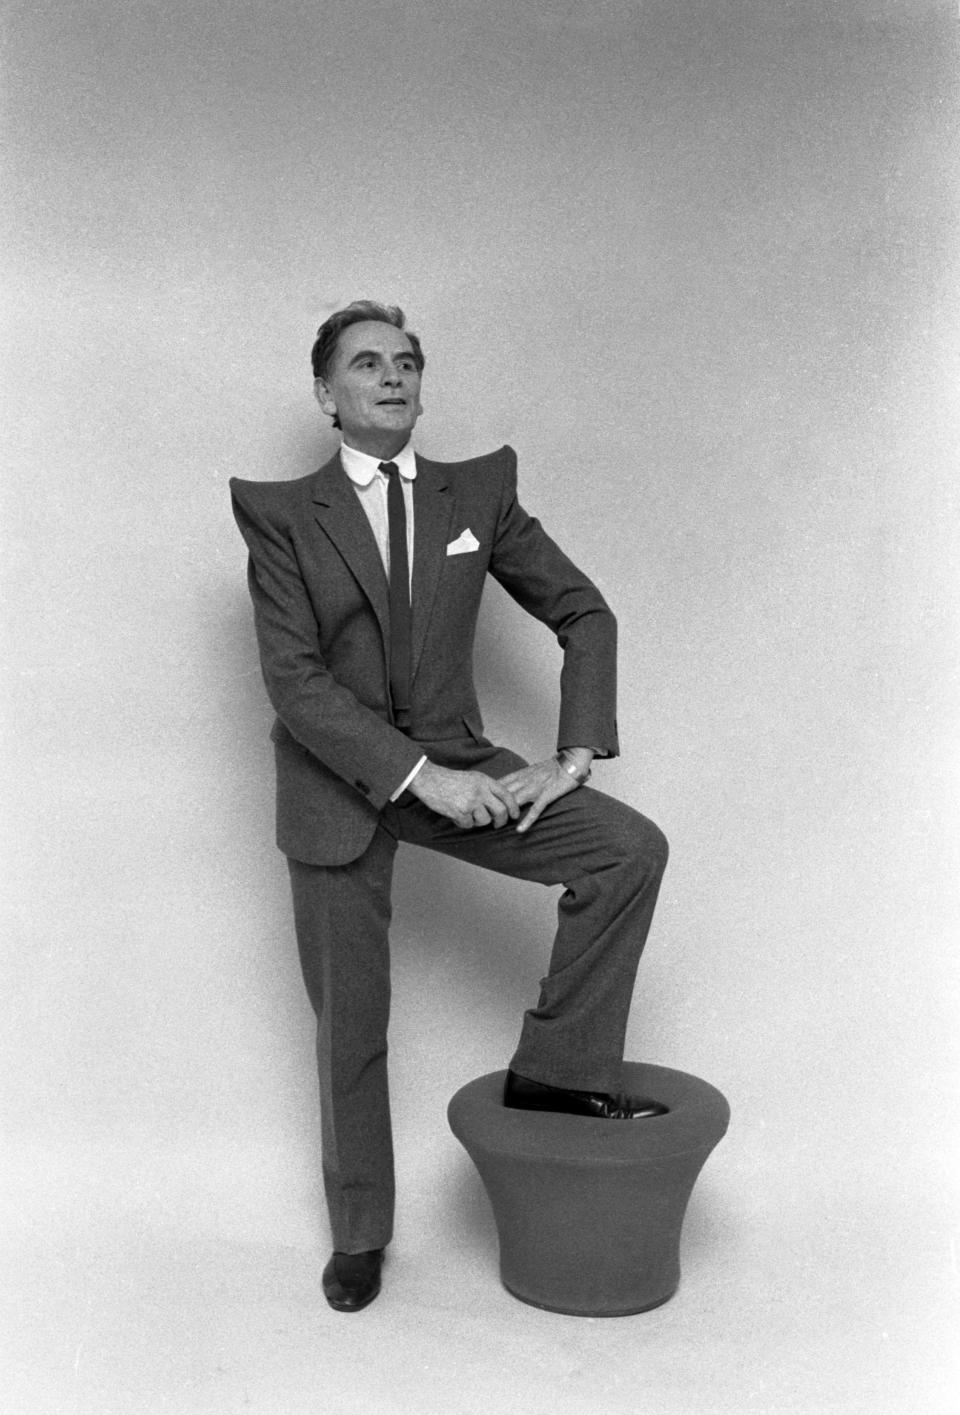 Pierre Cardin wearing a suit with prominent upwards sloping shoulders